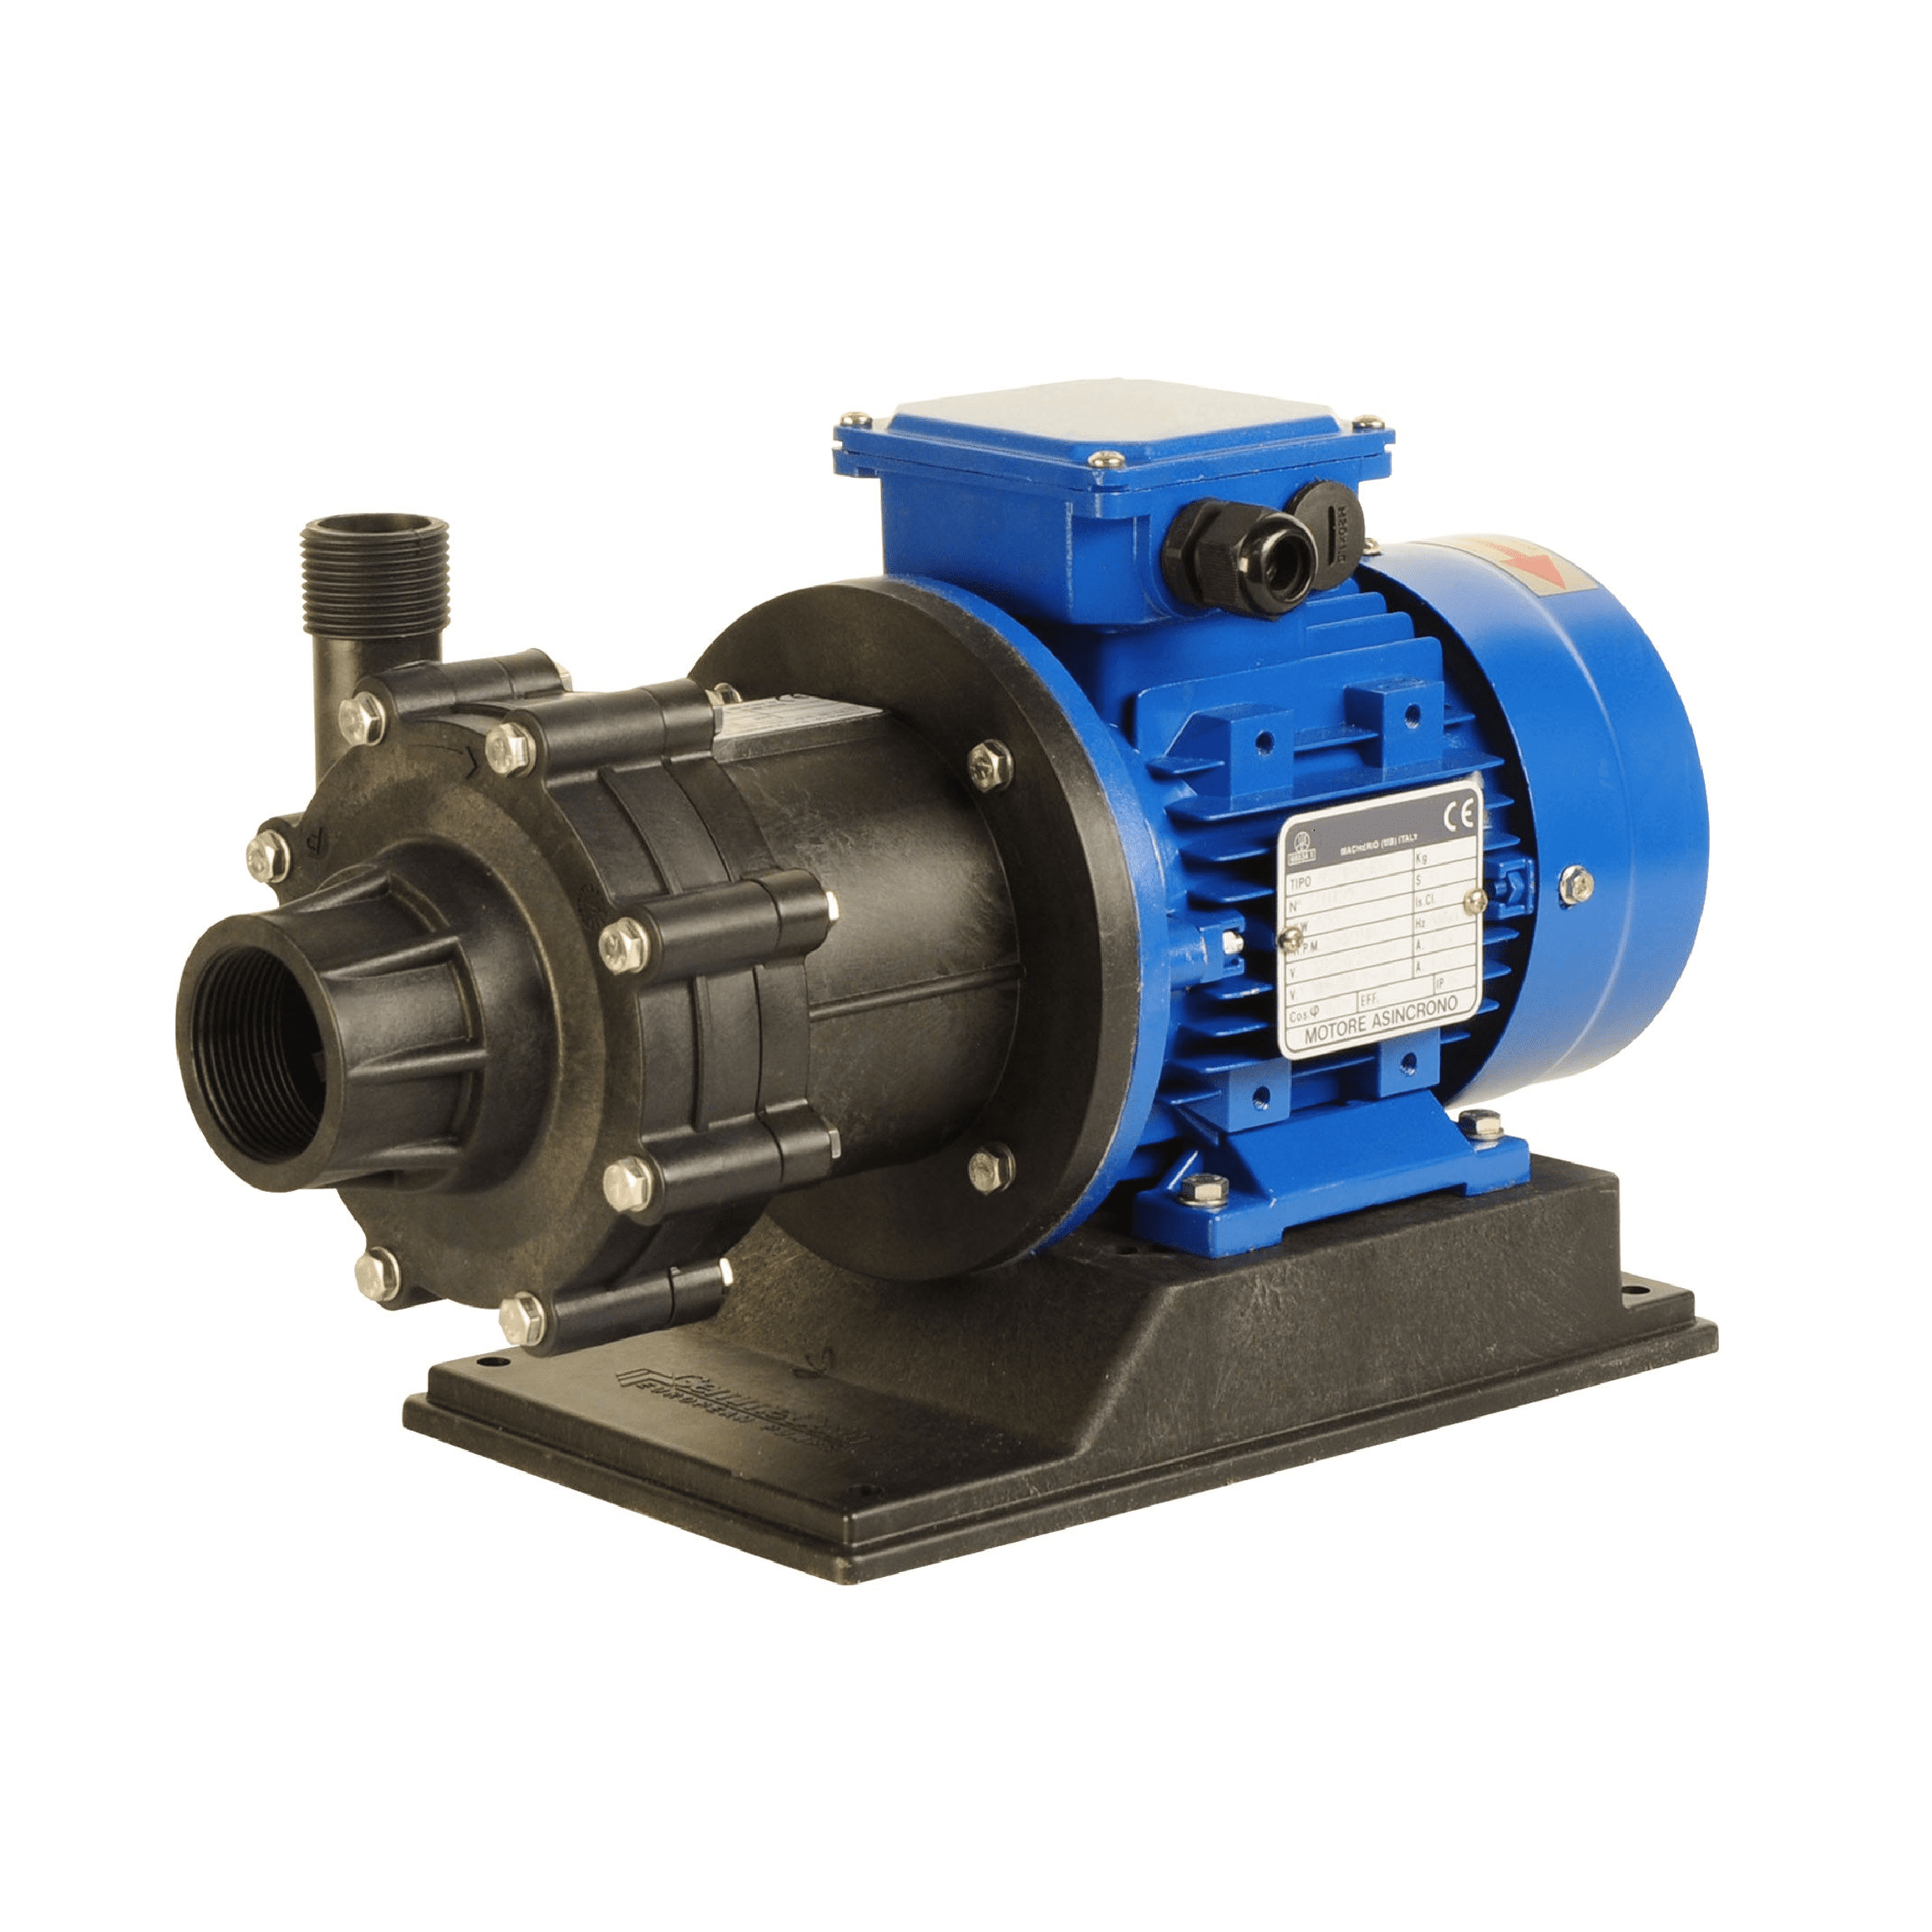 HTM PP/PVDF – Magnetic drive centrifugal pumps in thermoplastic materials